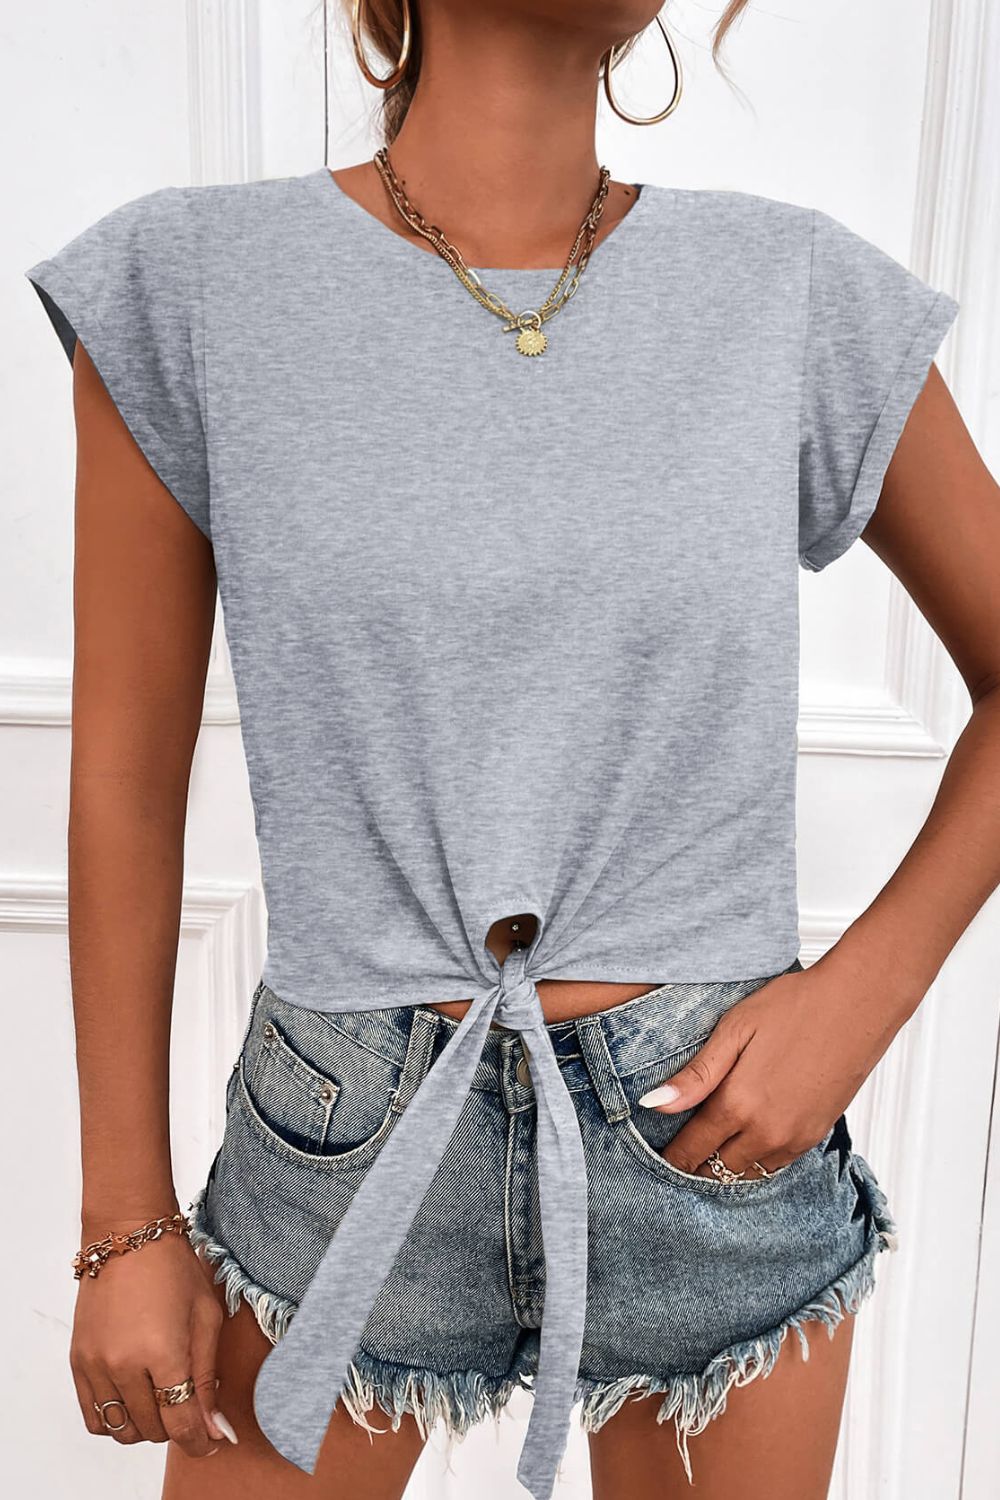 Tied Round Neck Crop Tee - Gray / S - T-Shirts - Shirts & Tops - 11 - 2024